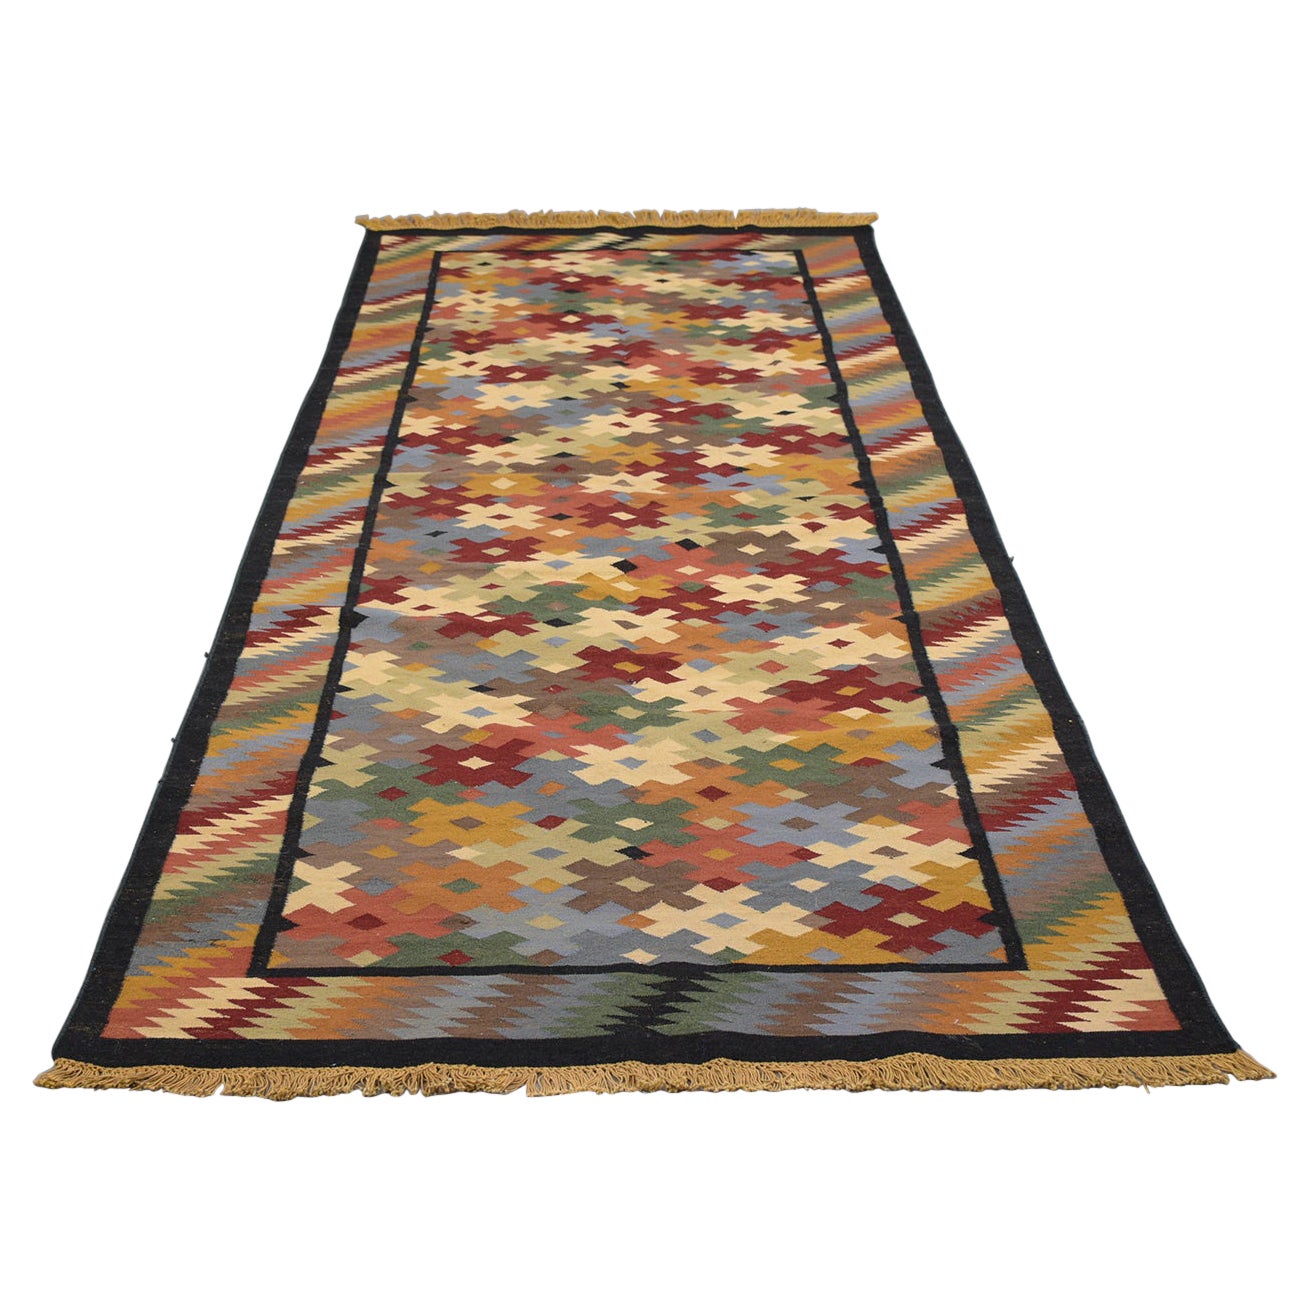 Early 1900s Multicolor Symmetrical Pattern Textile Rug